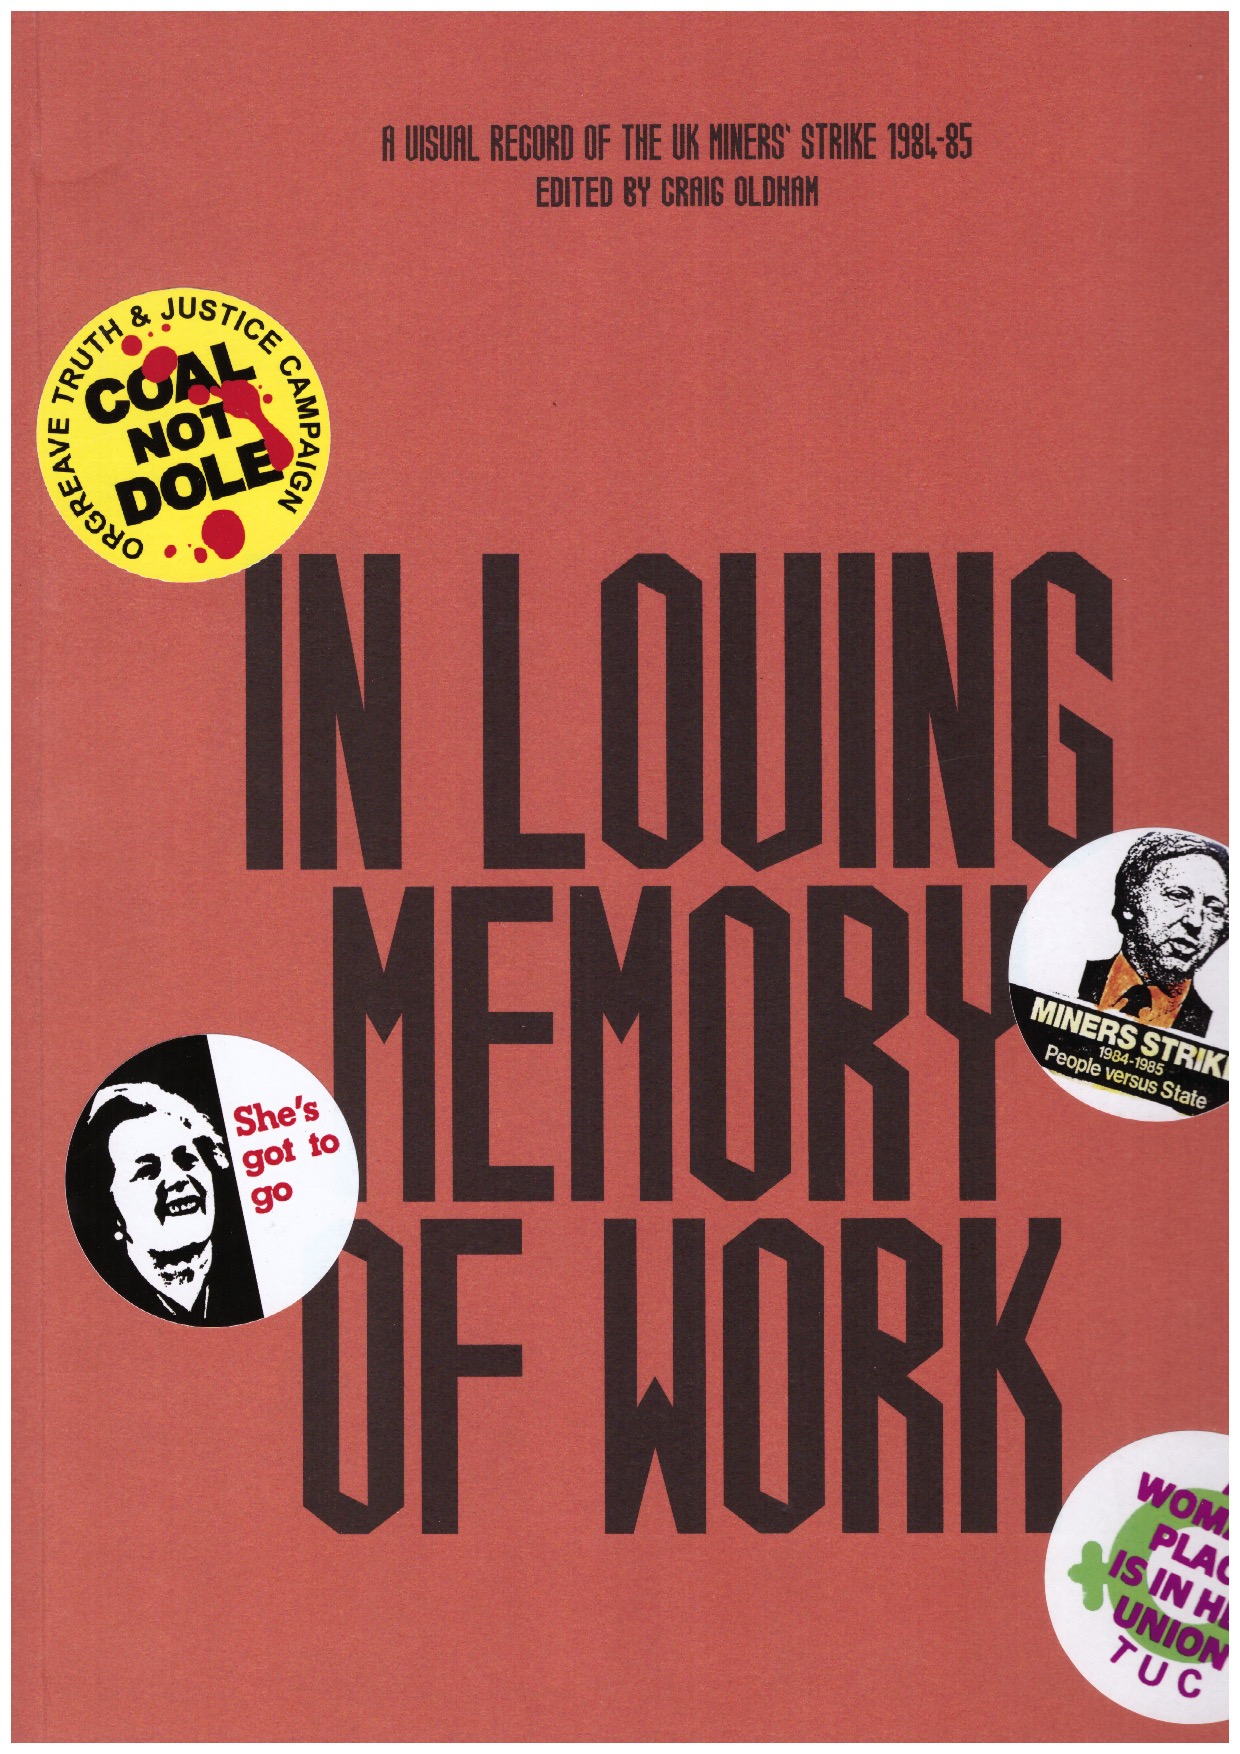 OLDHAM, Craig (ed.)  - In Loving Memory Of Work: A Visual Record of The UK Miners’ Strike, 1984-85